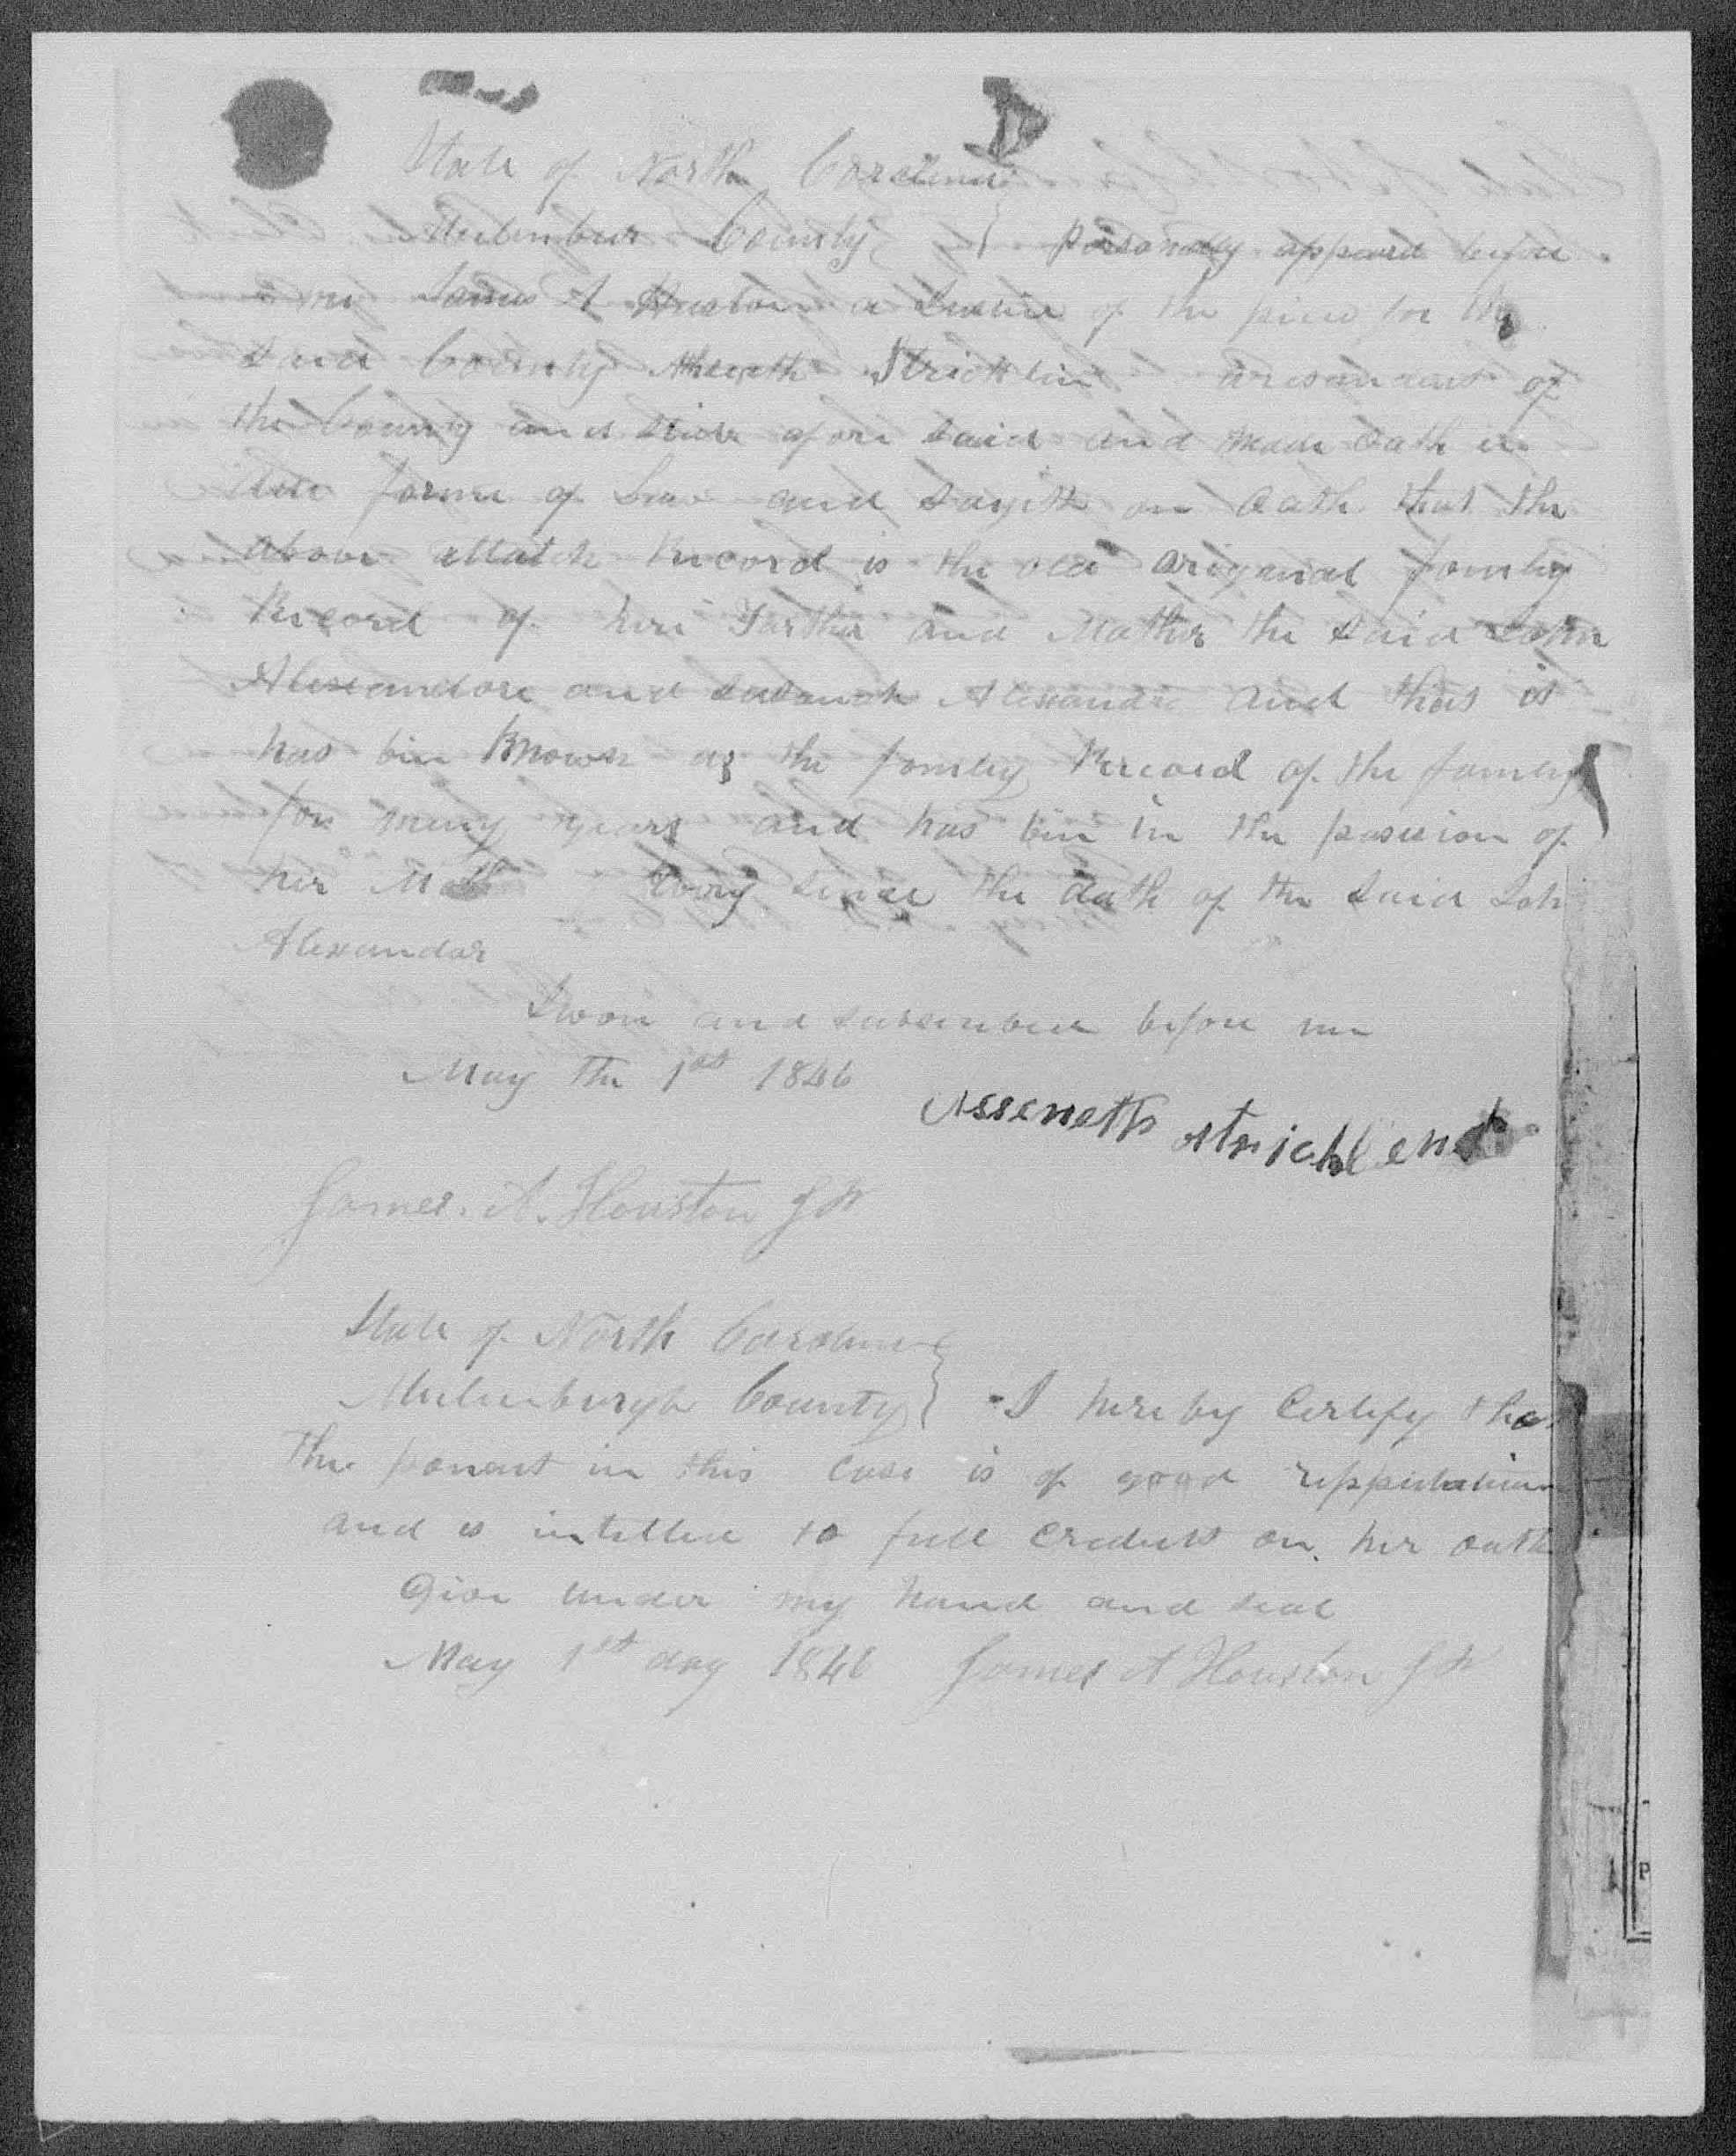 Affidavit of Asseneth Stricklen in support of a Pension Claim for Susana Alexander, 1 May 1846, page 1